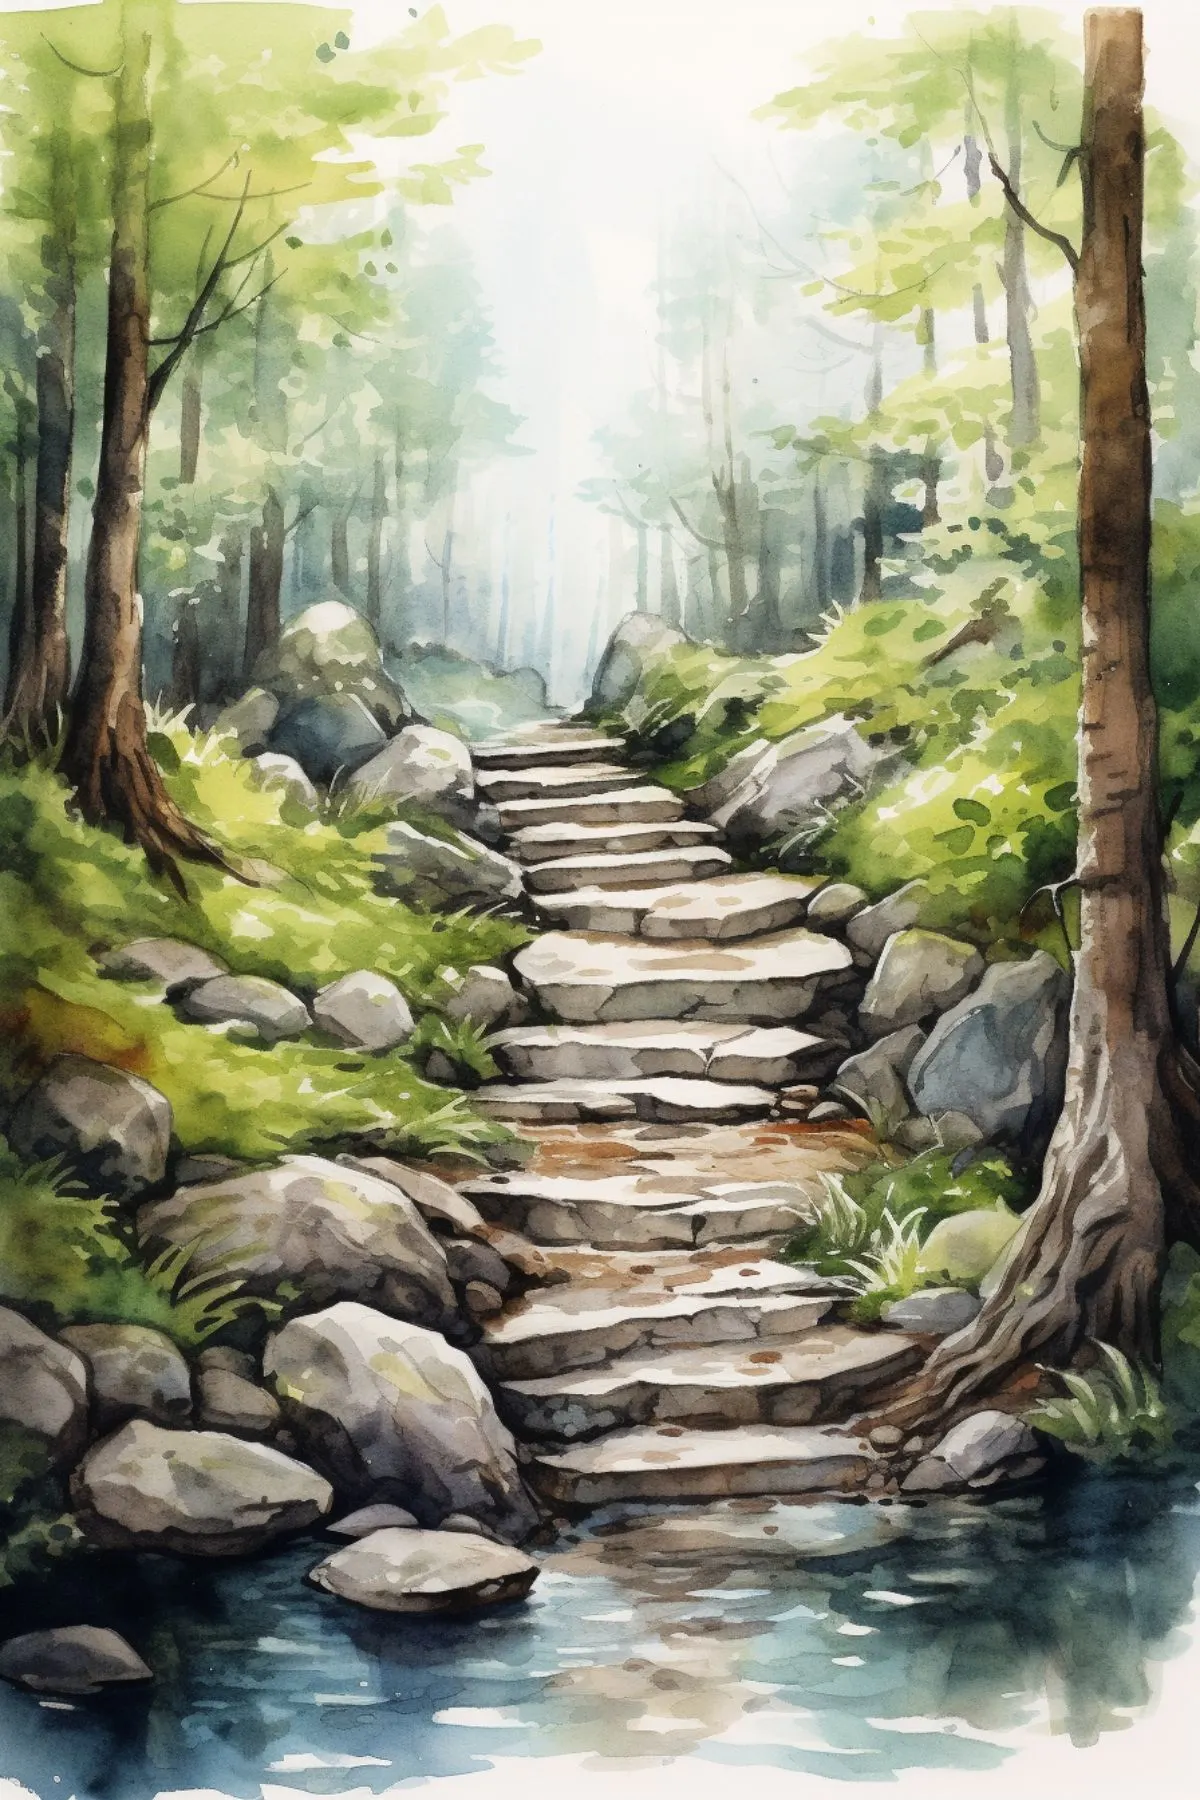 Cover image for Bible Verses About Moving Forward Post - features an illustration of a rocky staircase in a serene forest